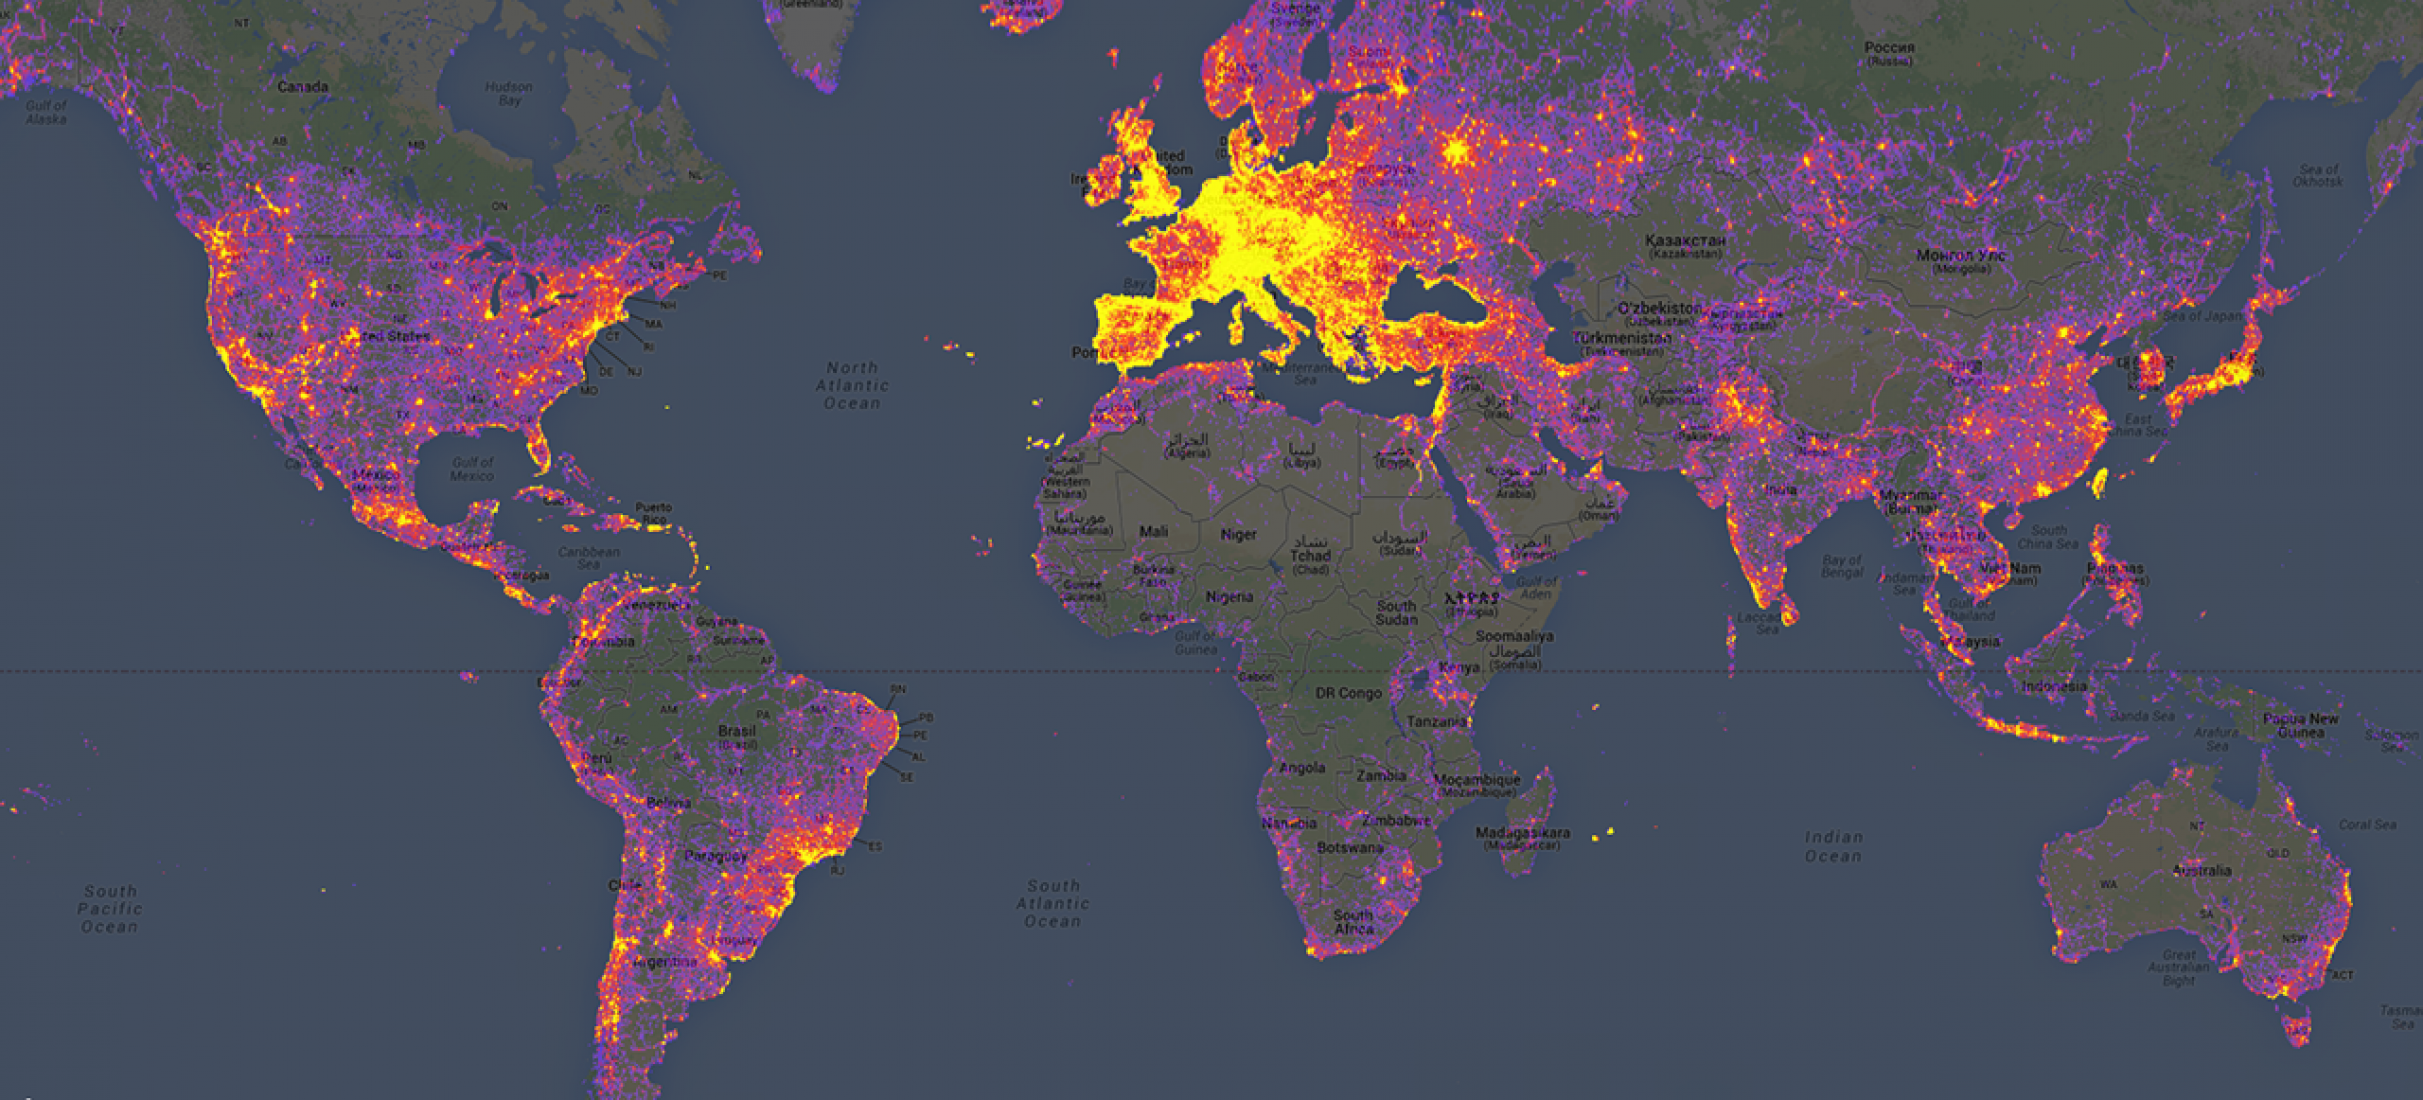 Sightsmap. Mapping the World's Most Photographed Locations.